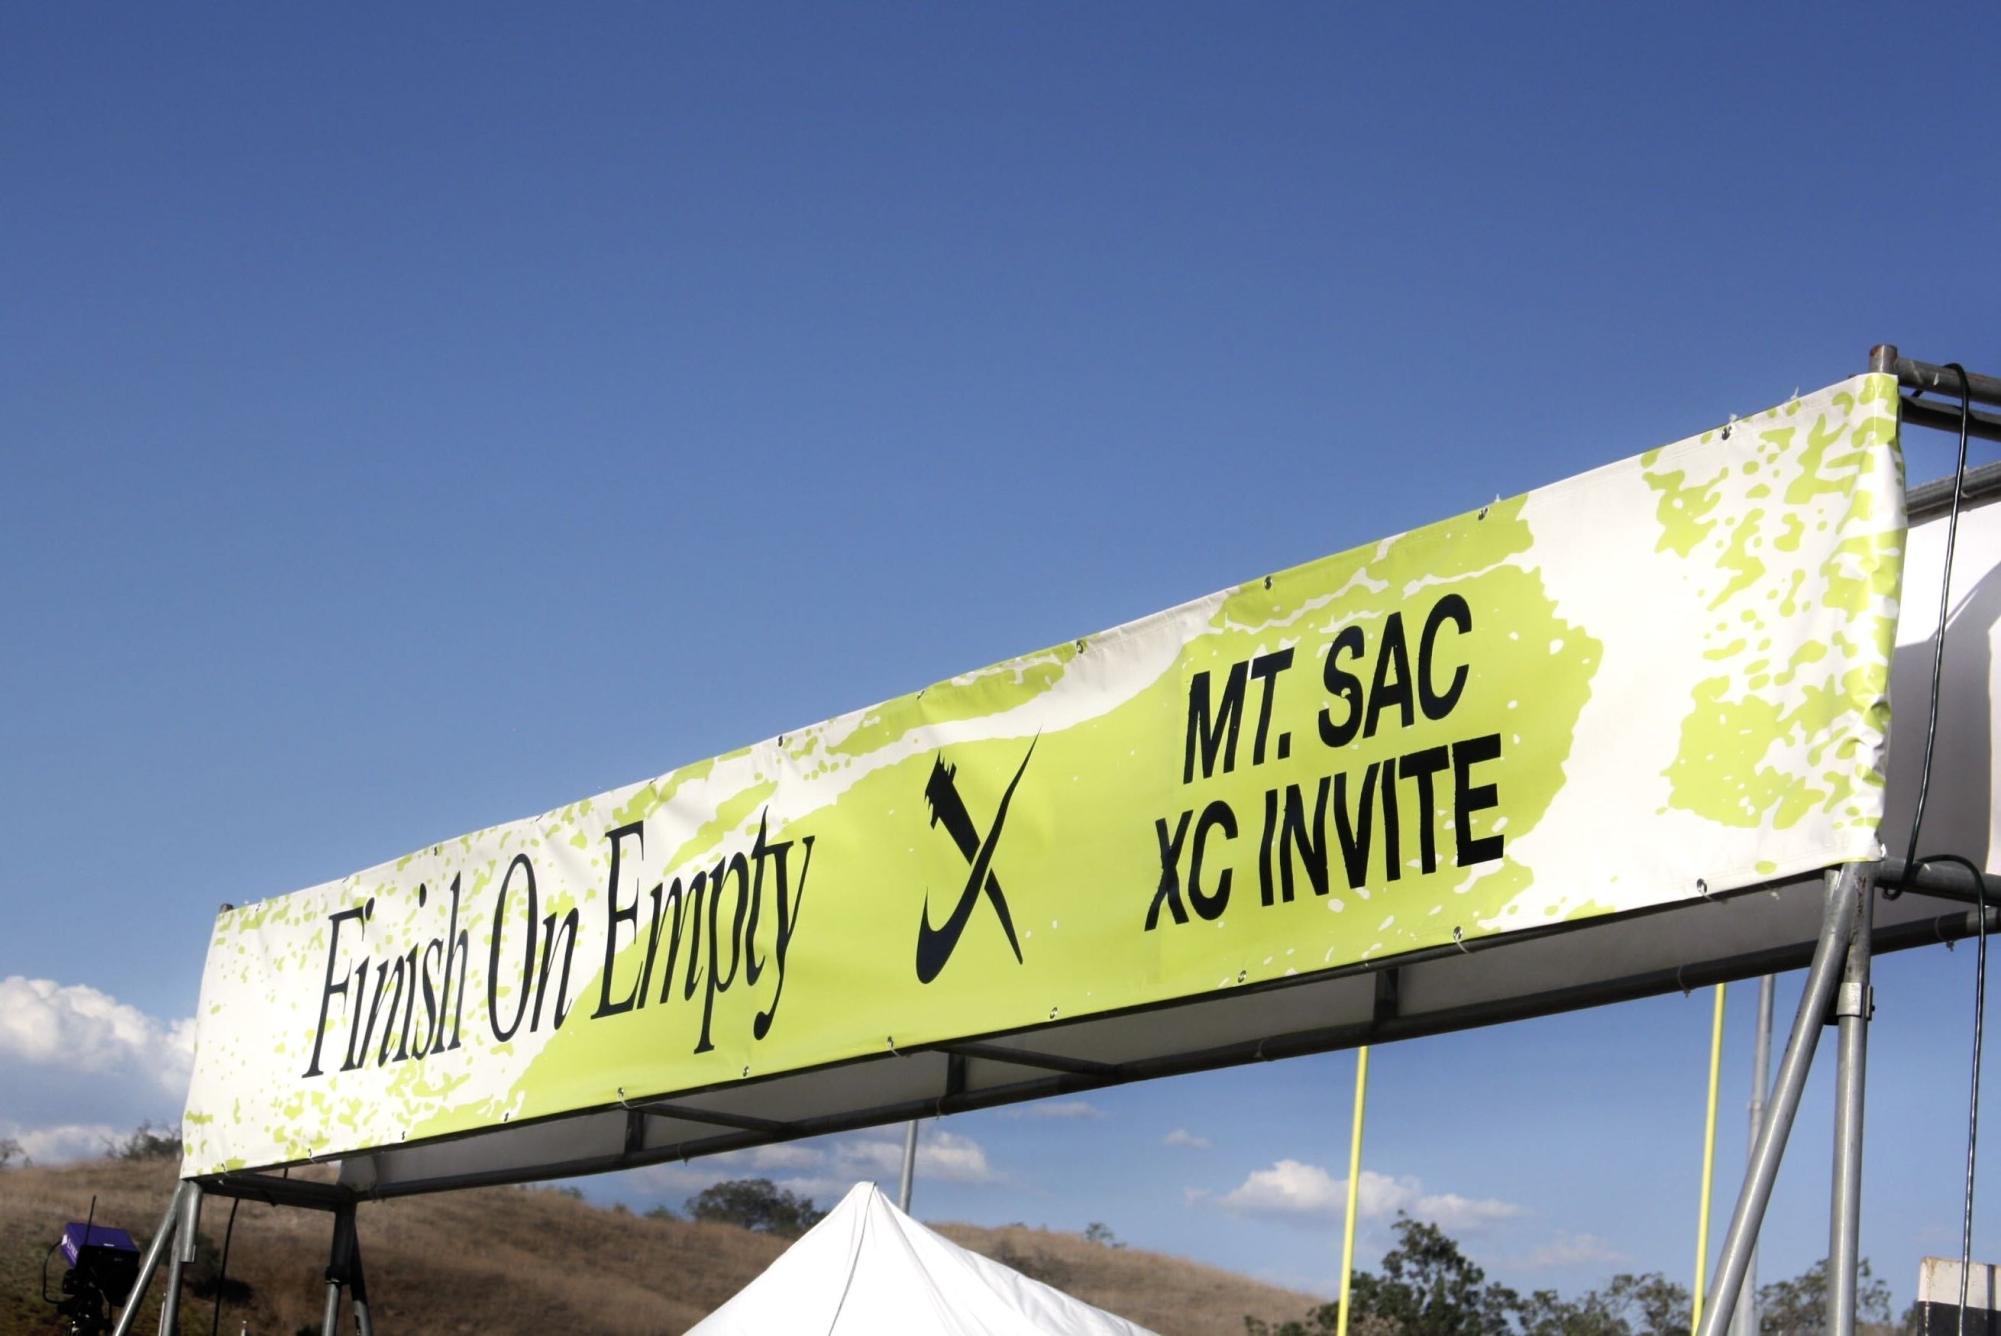 The Mt SAC. cross country invite is the largest cross country meet in the world, having thousands of athletes participate annually. It has been hosted at Mt. SAC Antonio College for 75 years.